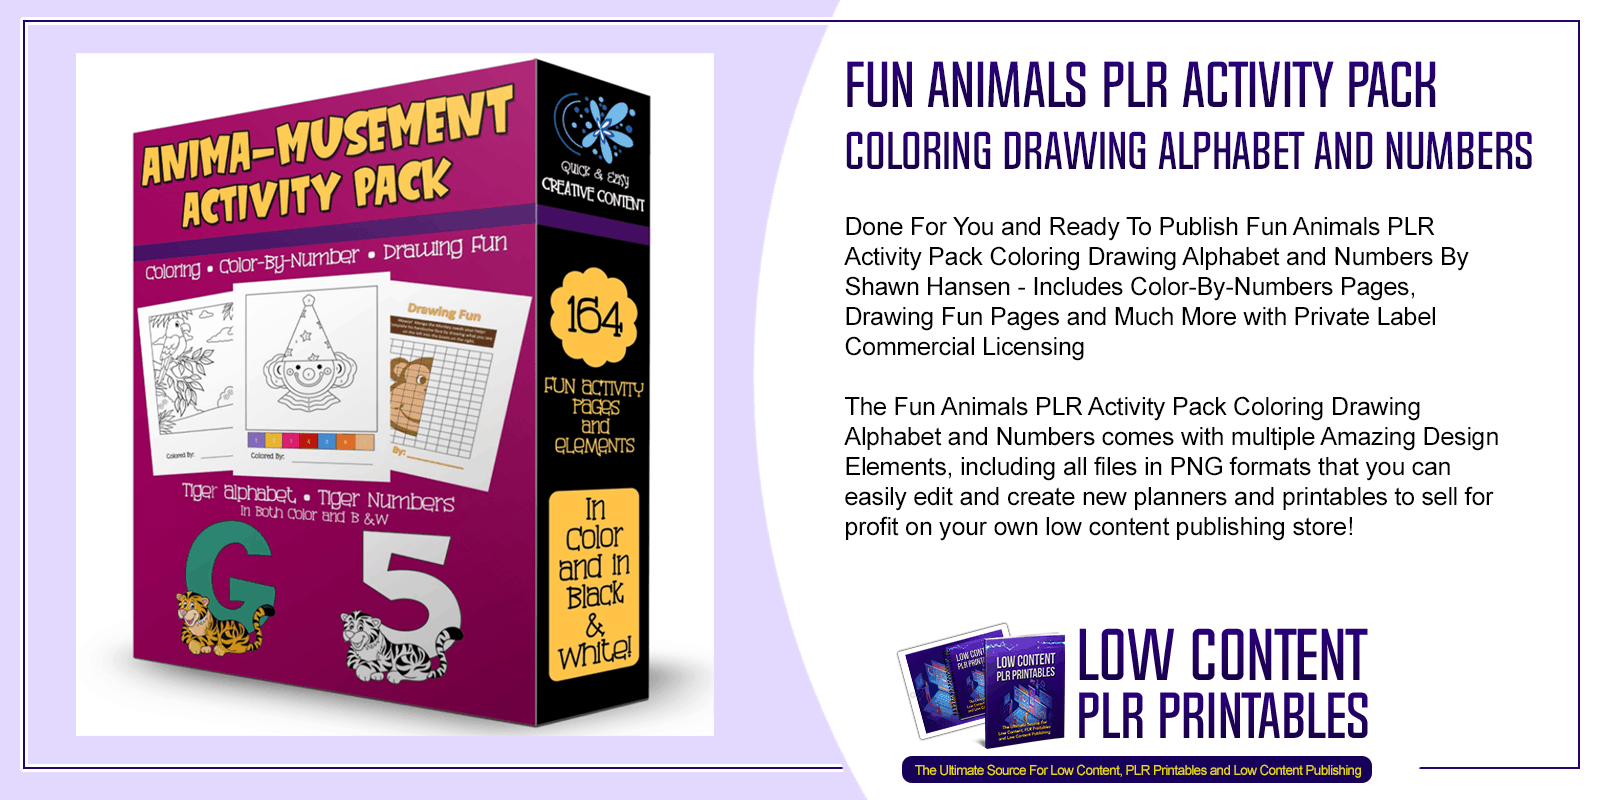 Fun Animals PLR Activity Pack Coloring Drawing Alphabet and Numbers